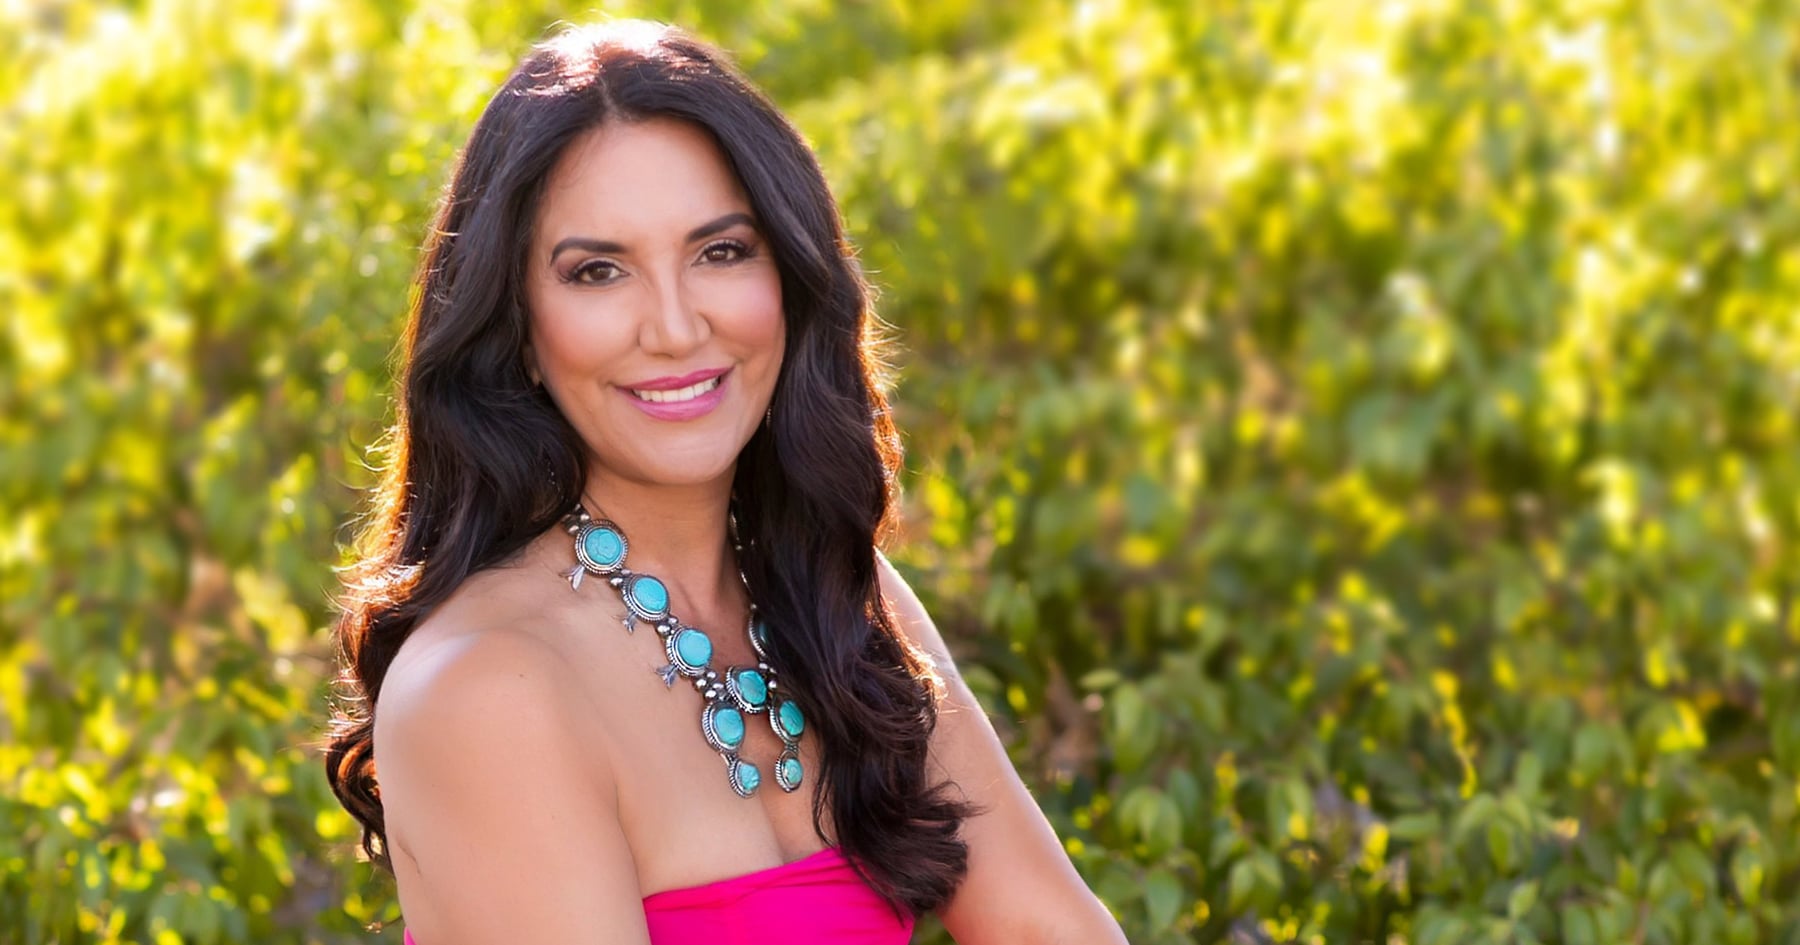 This Beauty Founder Harnesses Indigenous Wisdom to Create Her Products